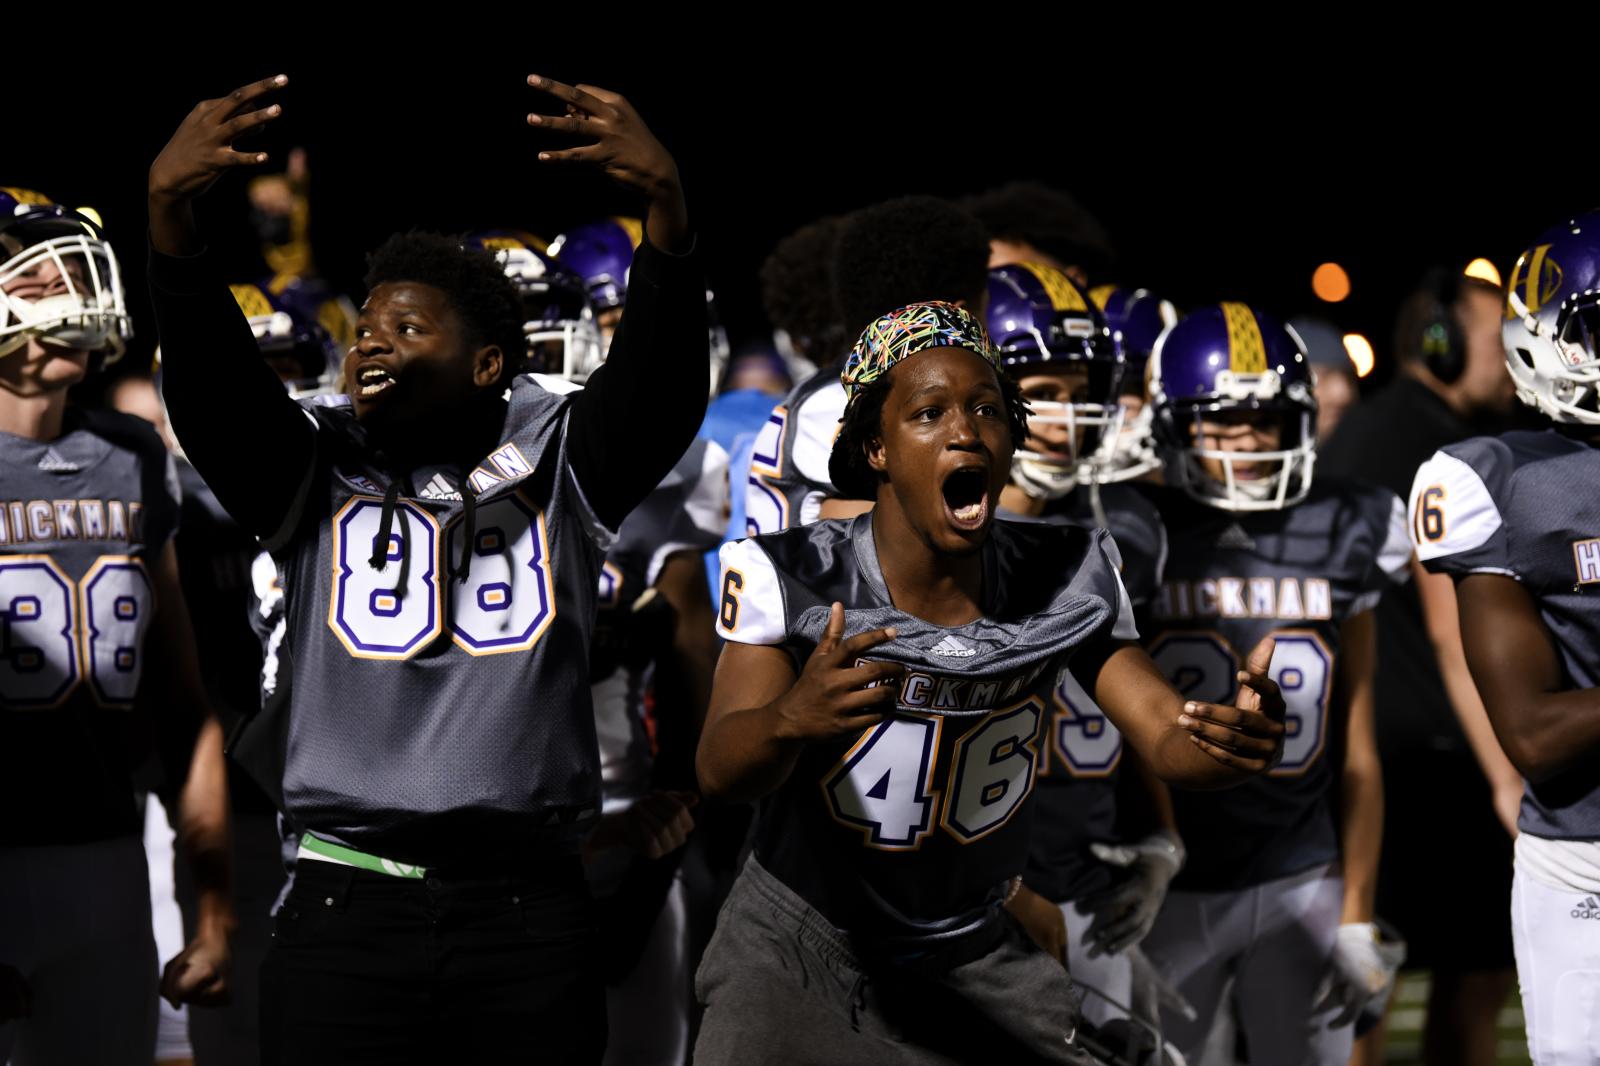 Image from Sports - Hickman High School players scream “That’s...